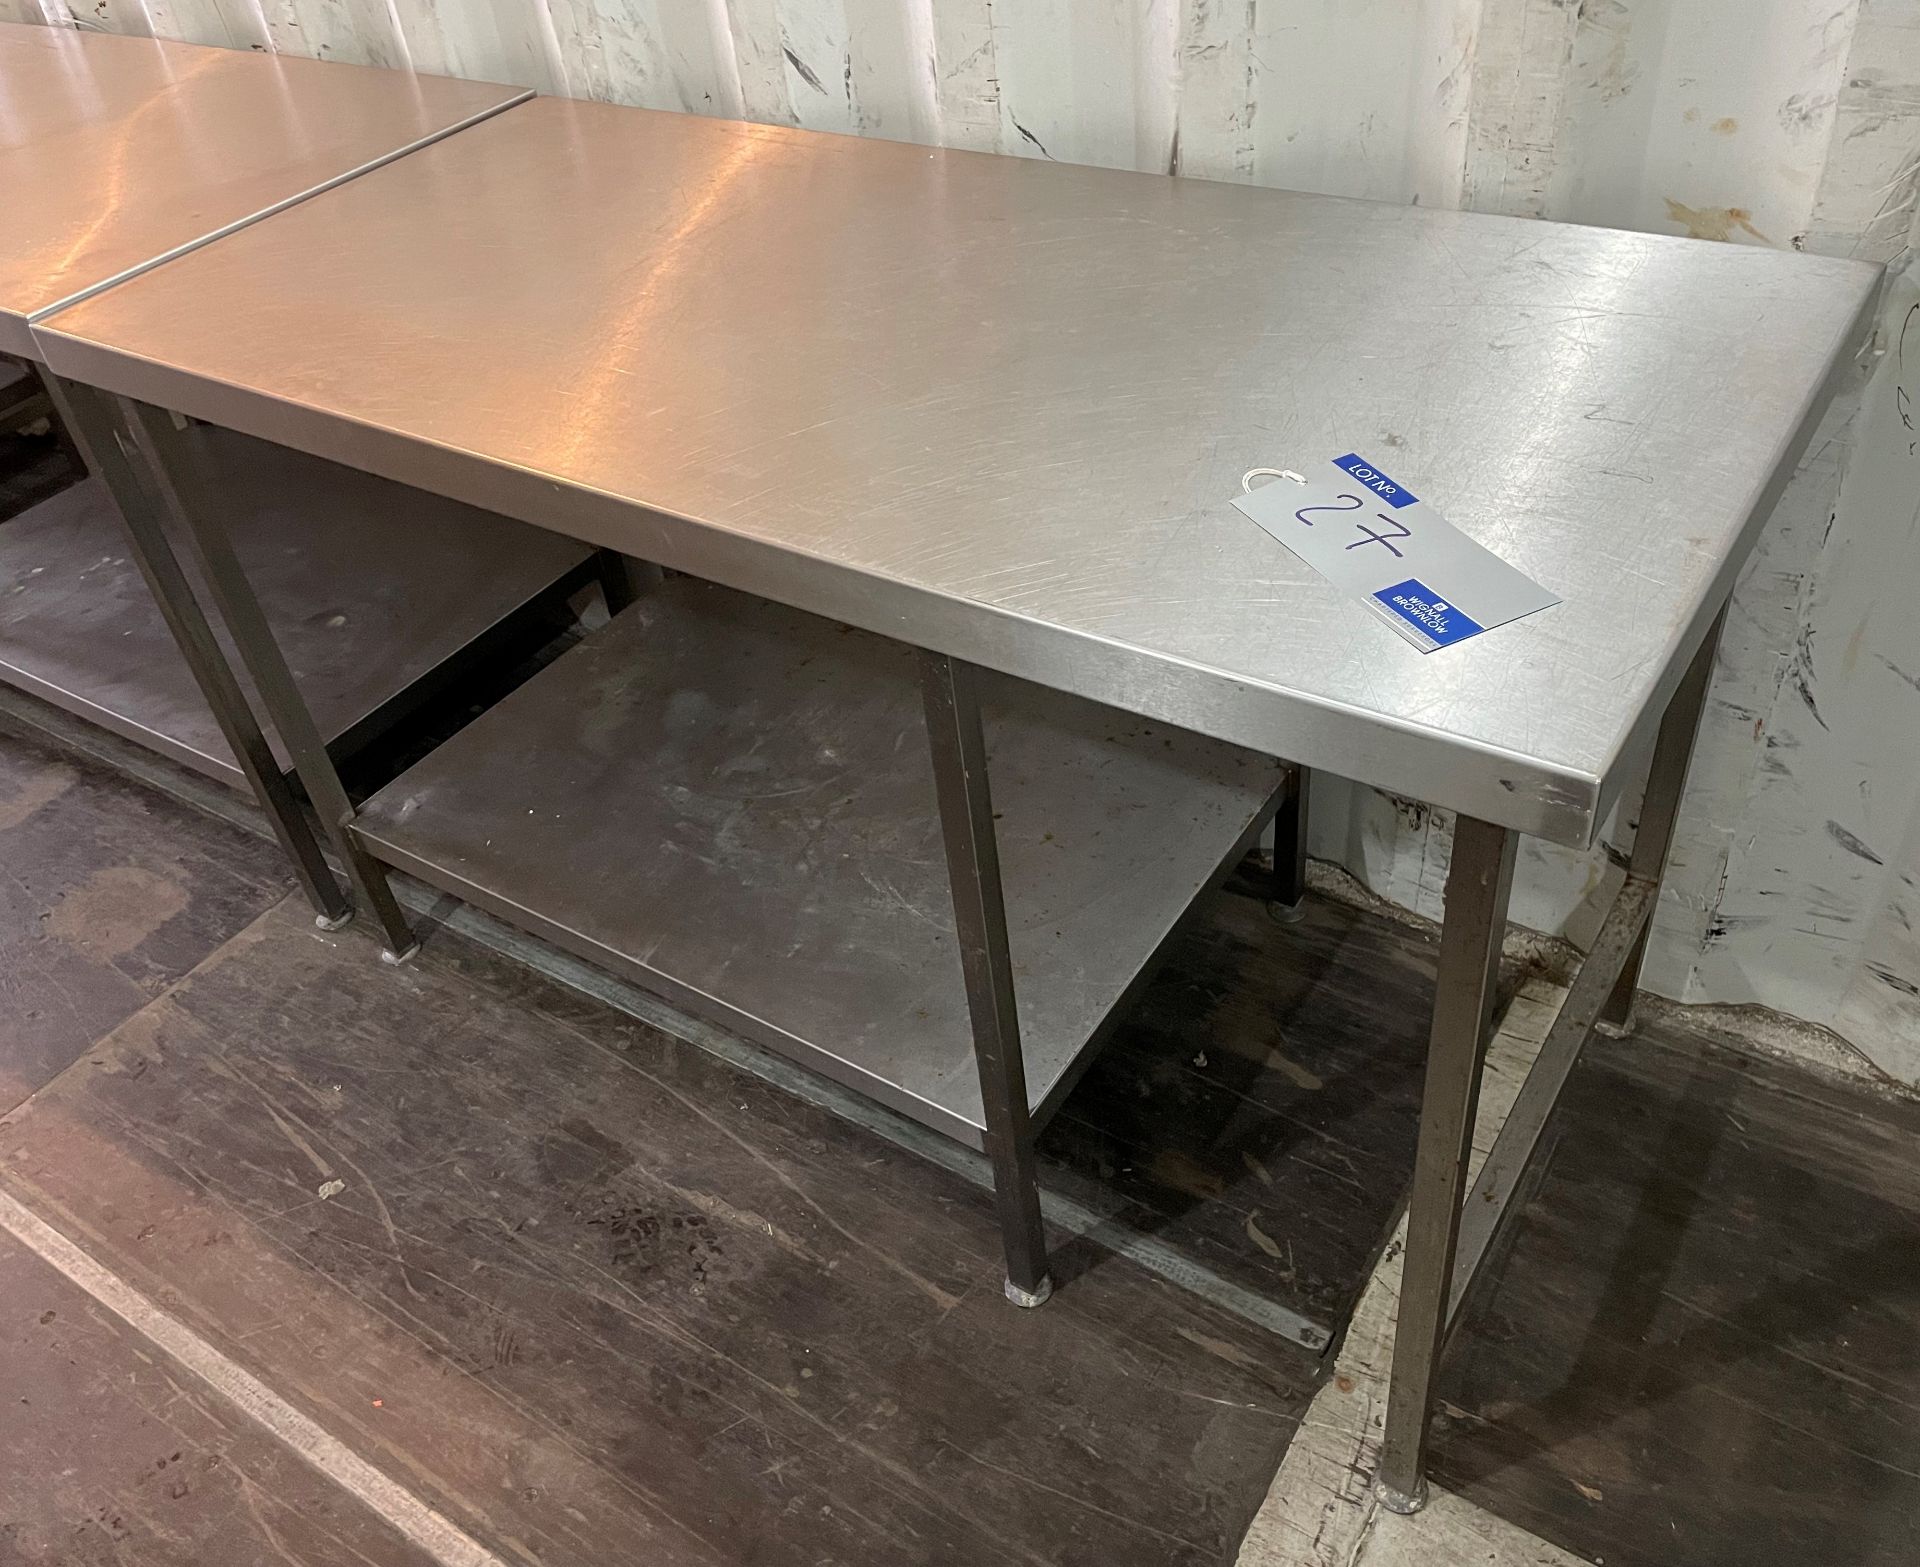 A Stainless Steel Food Preparation Bench, 150cm x 70cm x 90cm with undershelf (located at EMS